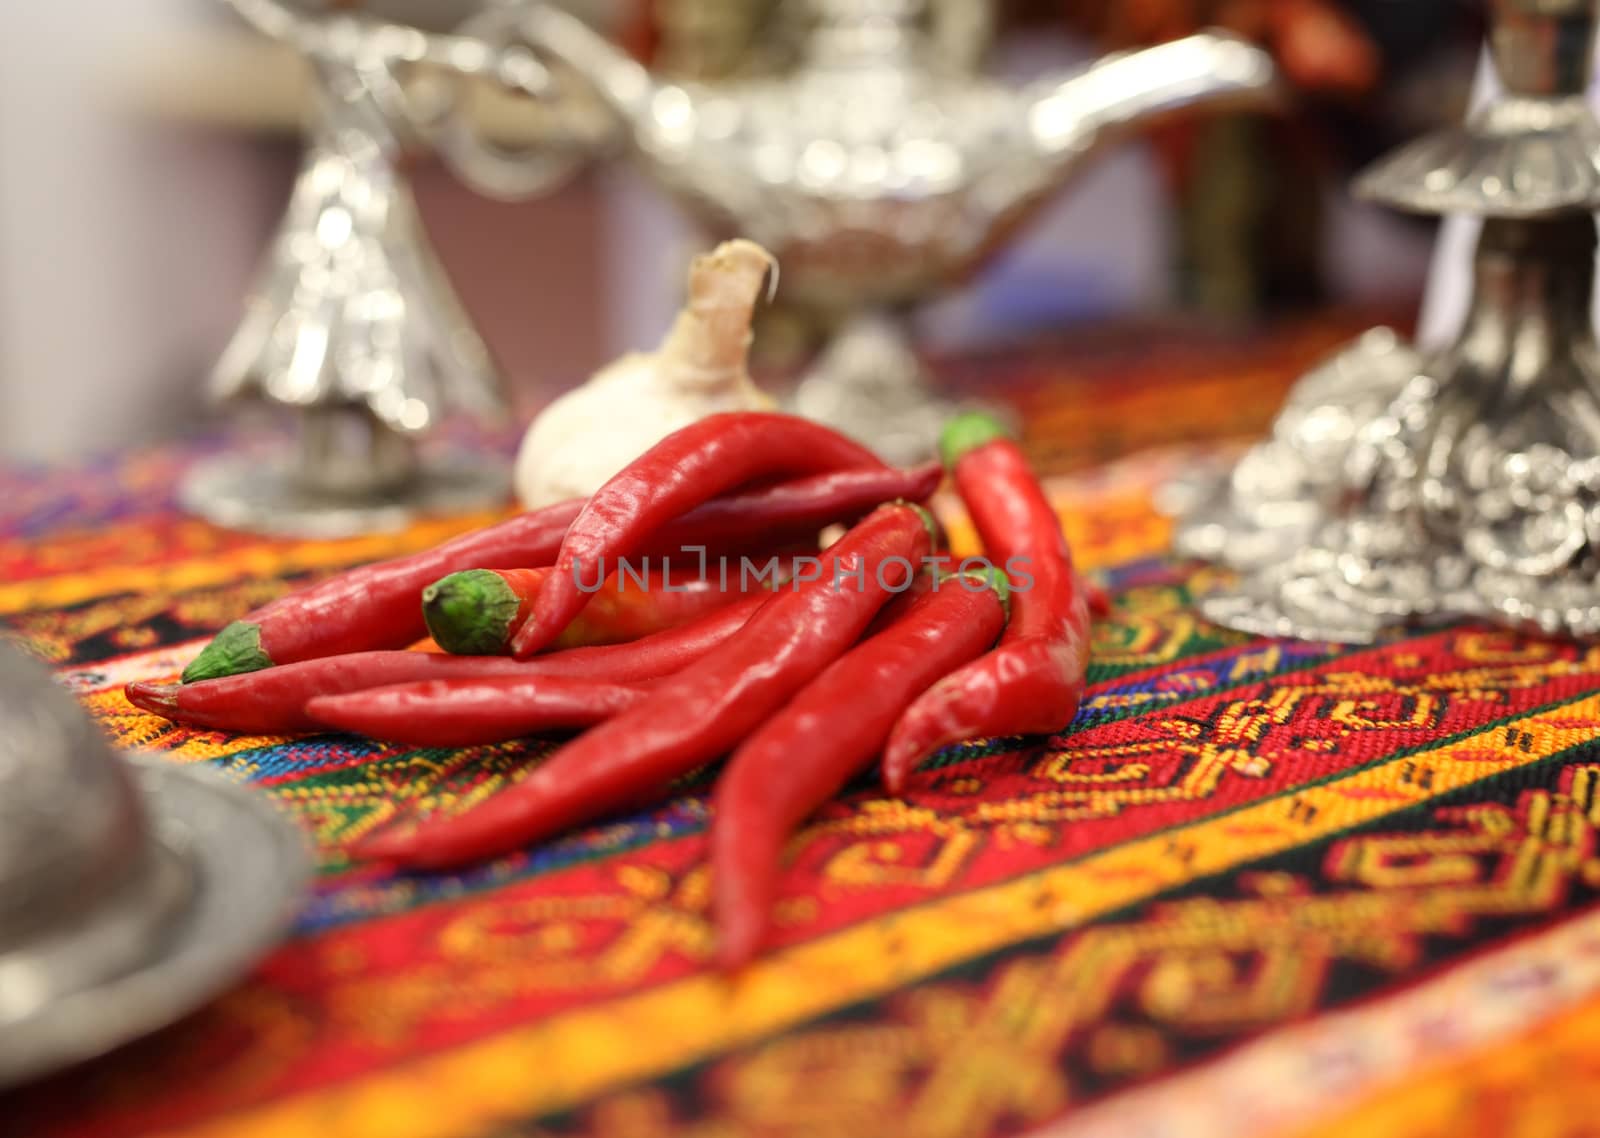 Red Chili pepper on Turkish table by shamtor